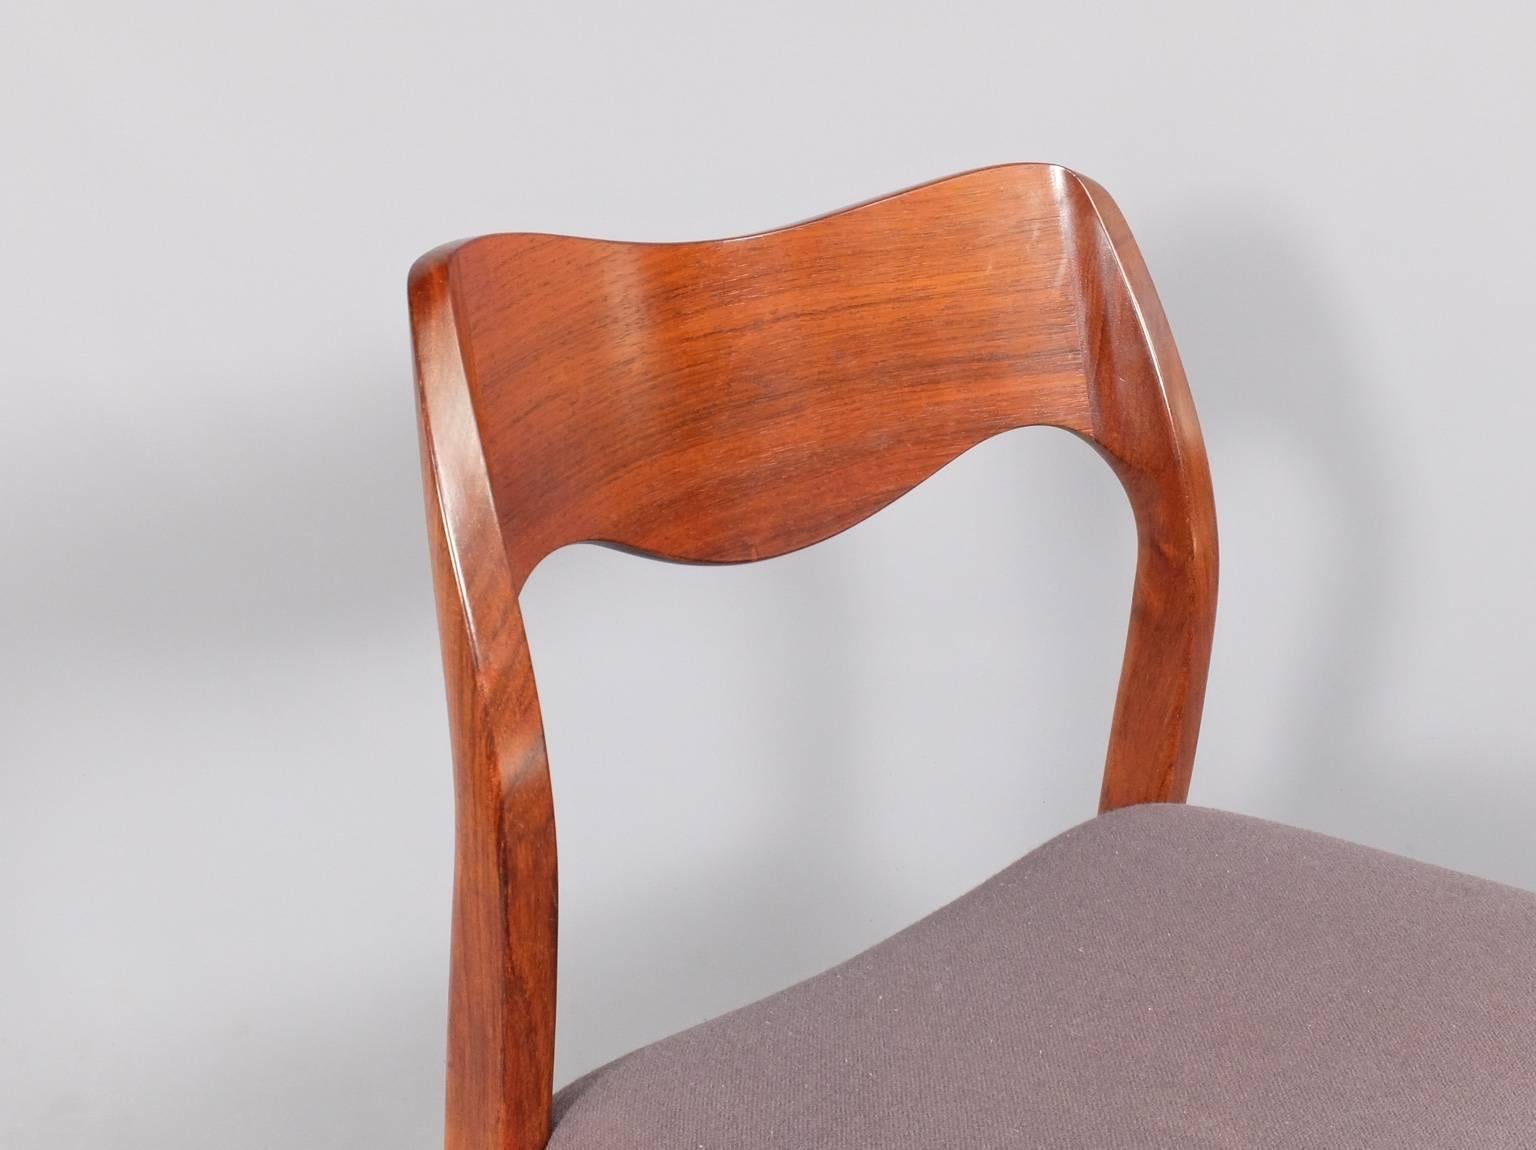 A beautiful set of Danish Modern Mid-Century dining chairs in beautifully figured timber. Designed by Arne Hovmand Olsen and produced by J L Moller in the 1960s. These are Model 71 with a wonderfully deep and comfortable, curved backrest. The seats